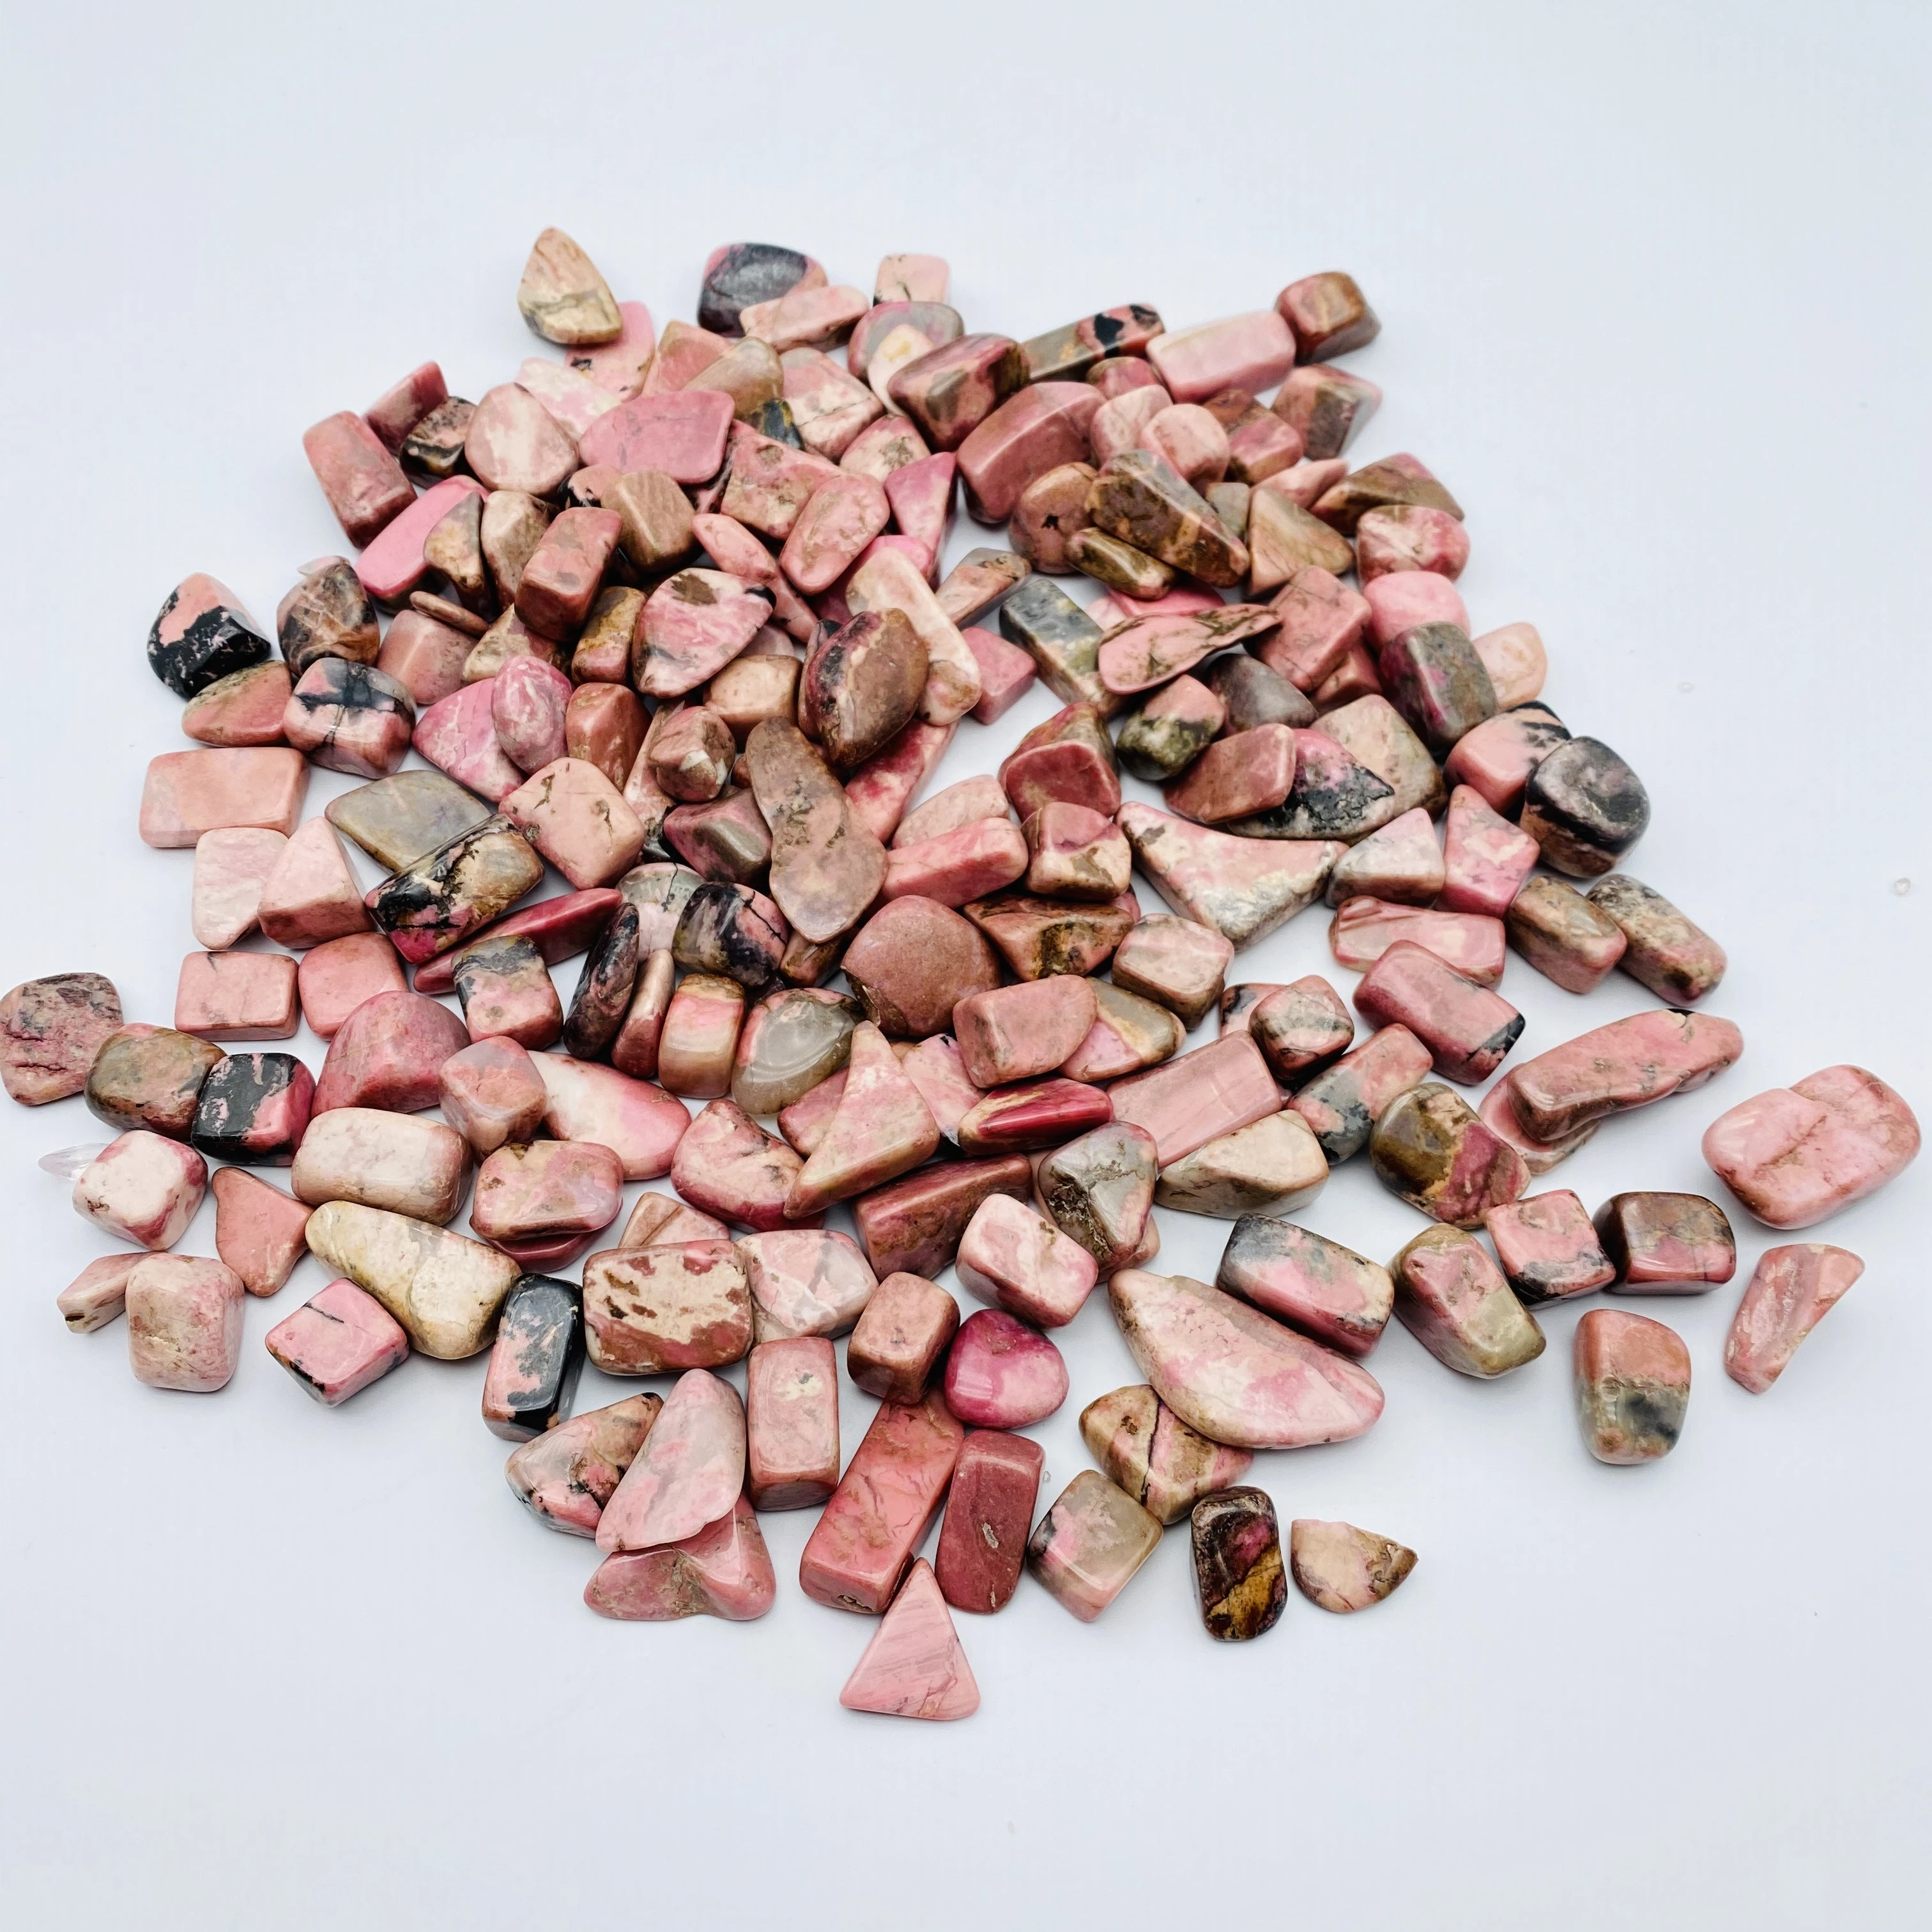 Natural pink rhodonite tumbled stone polished crystal gravel stone healing for sale